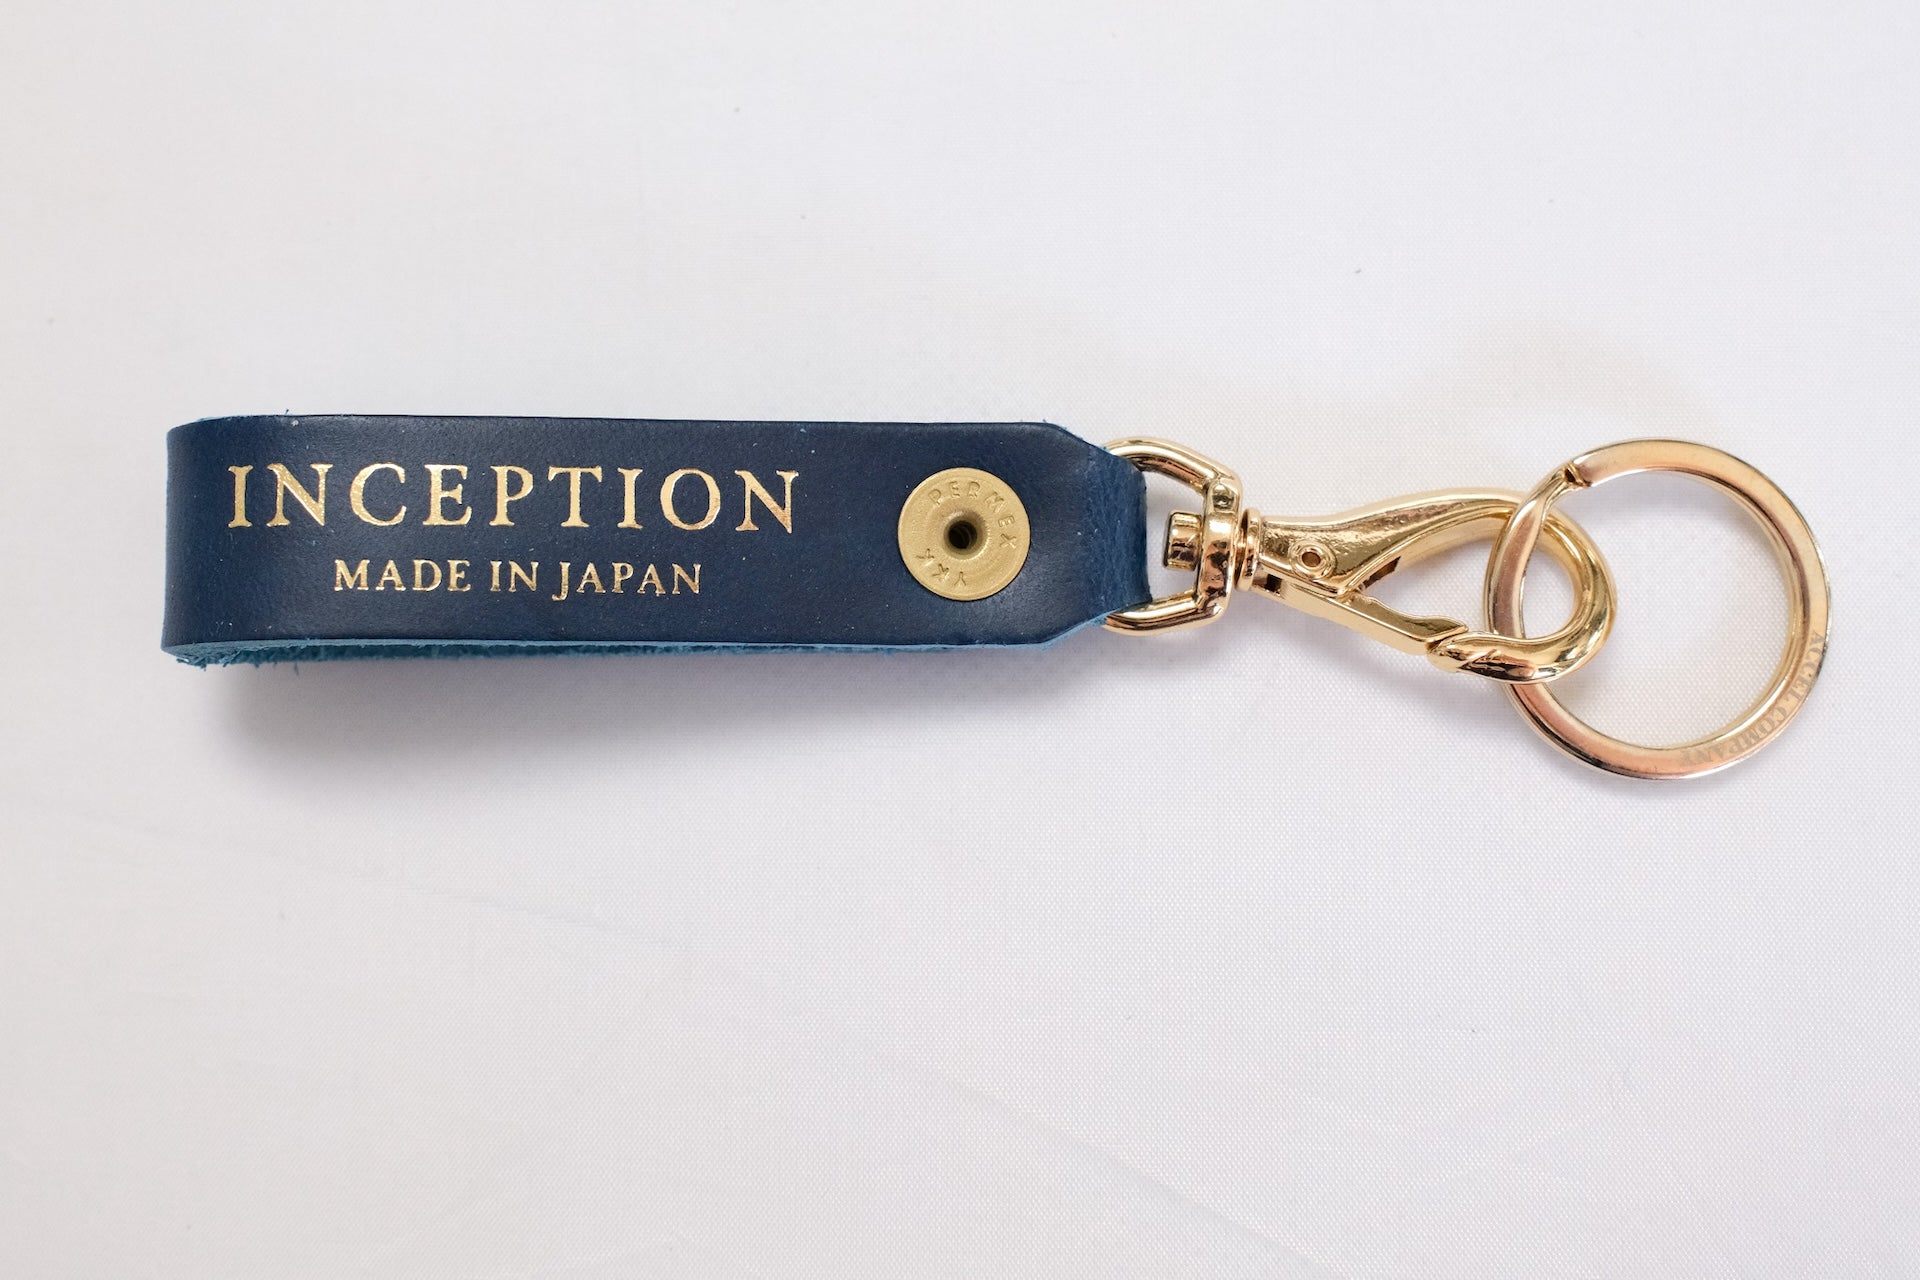 Inception by Accel Company 'Full-Grain Cowhide' Key Holders (Limited Edition)